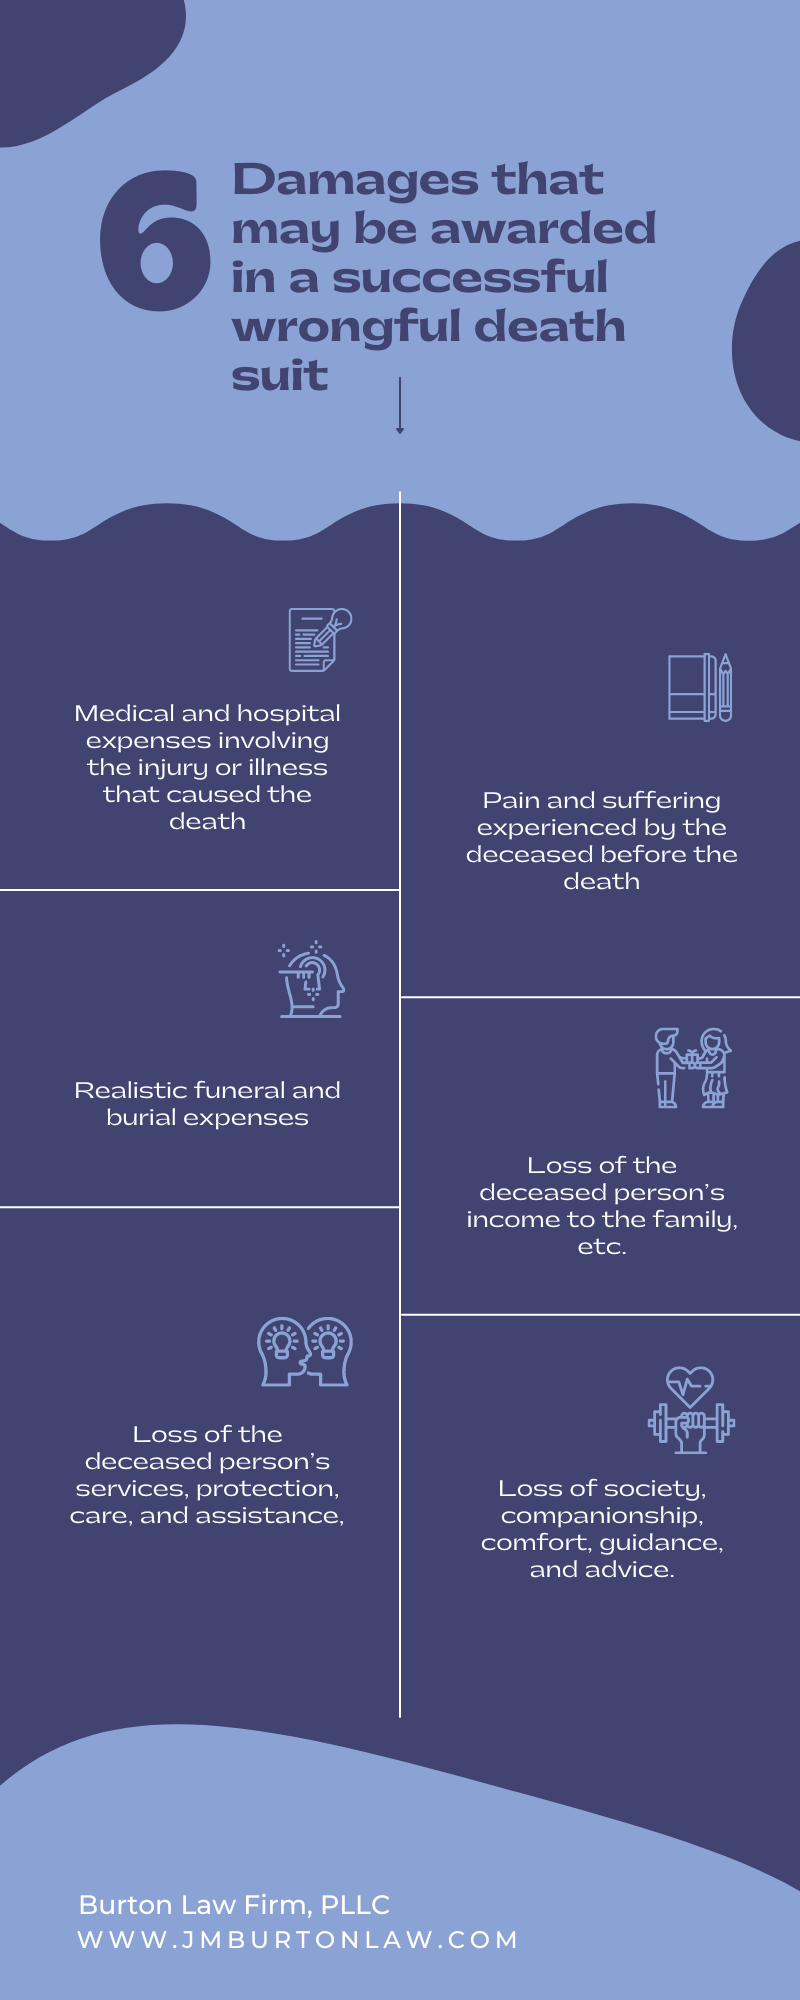 6 Damages that may be awarded in a successful wrongful death suit Infographic